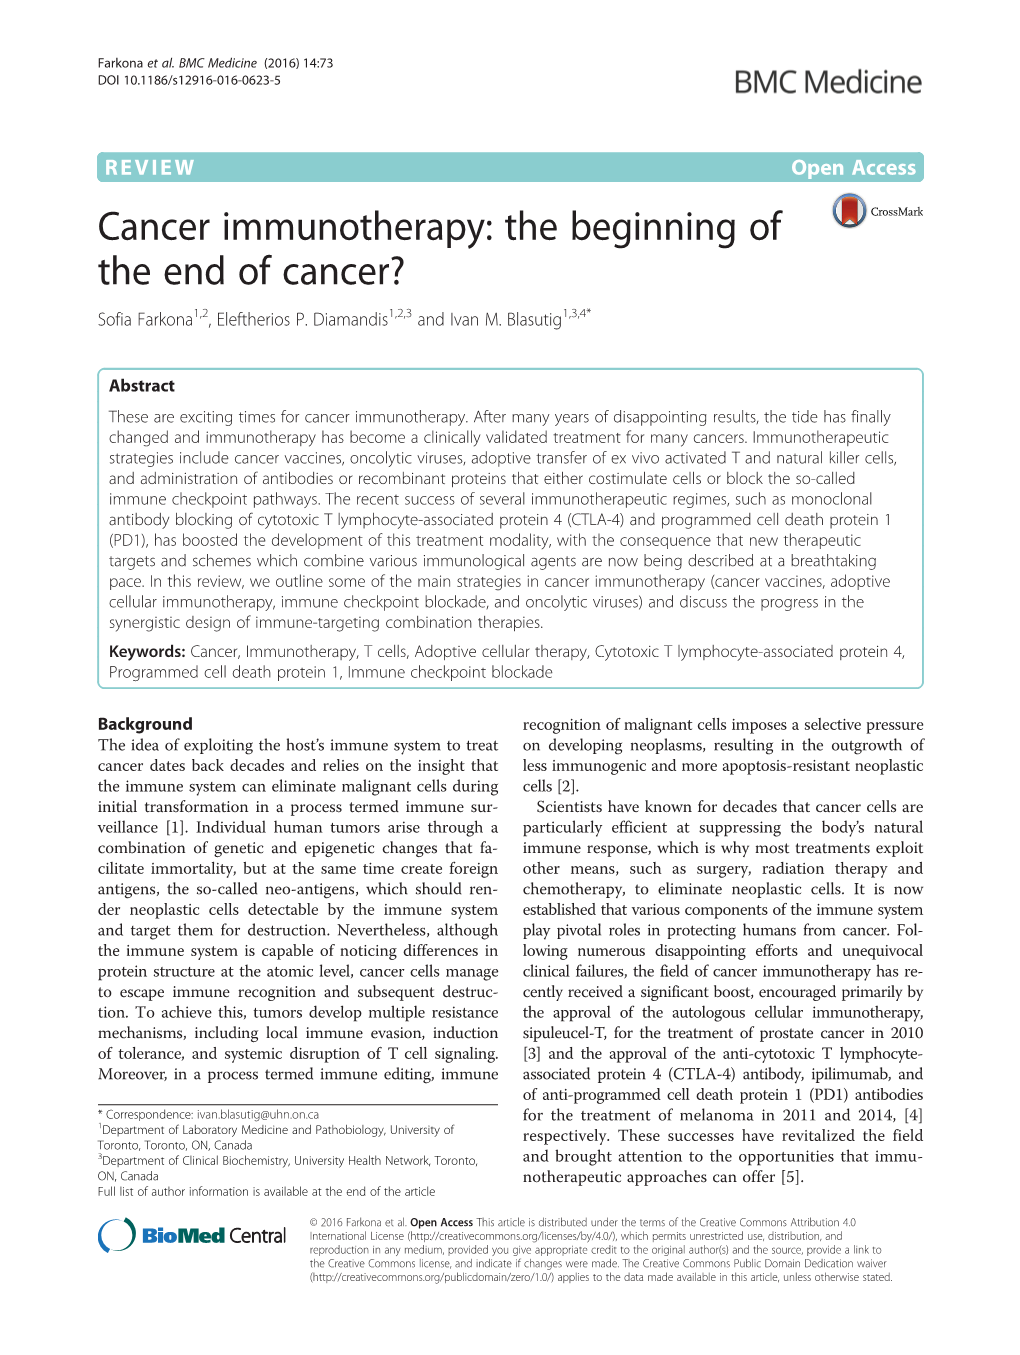 Cancer Immunotherapy: the Beginning of the End of Cancer? Sofia Farkona1,2, Eleftherios P